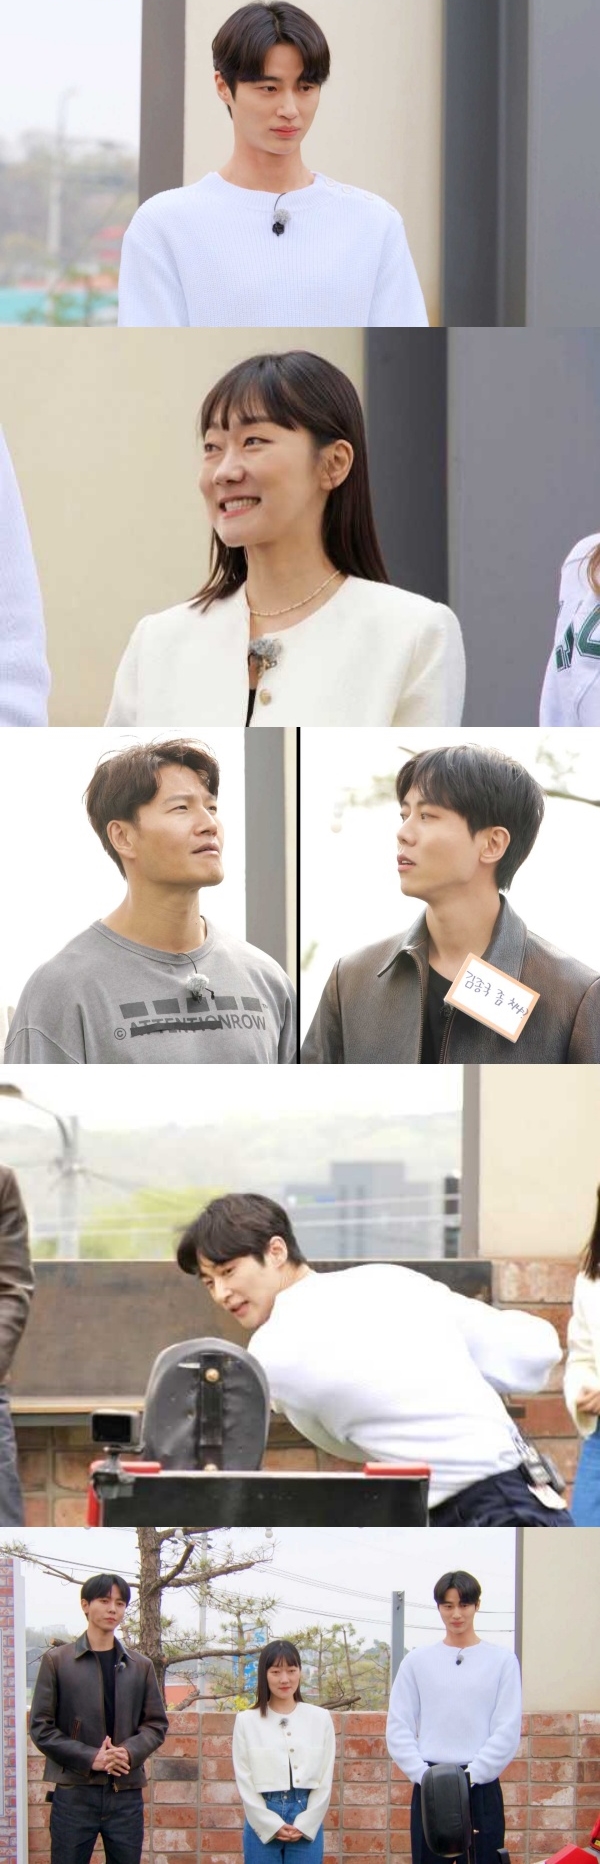 Joo Jae, Park Kyung Hye, and Wooseok show off their artistic sense in Running Man.Hot guests will be on SBS Running Man which will be broadcast on May 1.From his first appearance, Joo Woo-jae, a model who has been in the position of the National Hogu, and Wooseok, an actor who shook his emotions with his appearance and acting skills, and Park Kyung-hye, an actor who took a picture of all roles, will be on the guest list.They have been pushing the steamers since the recent opening of the recording.Joo Woo-jae, a paper doll who certified that he was weak every time he appeared, provoked him with confidence this time, saying, Do you play Kim Jong-kook? But once again, he fell into the teasing of the members and laughed.On the other hand, unlike the appearance of the flower, Wooseok has attracted the charm of reversal with a rough man punch that surprised Kim Jong-kook, and Park Kyung-hye captivated the members with an energetic reaction.On the other hand, on this day, the Running Mon sticker Collection Race, which was made into the characters of the members using the Character Sticker Bread, which is causing a recent out of stock, was held, and it will add fun to the birth of an uncontrollable emerging strongman, saying, When you race, your eyes will turn.Running Man will be broadcast on May 1 at 5 pm.Photo: SBS Running Man